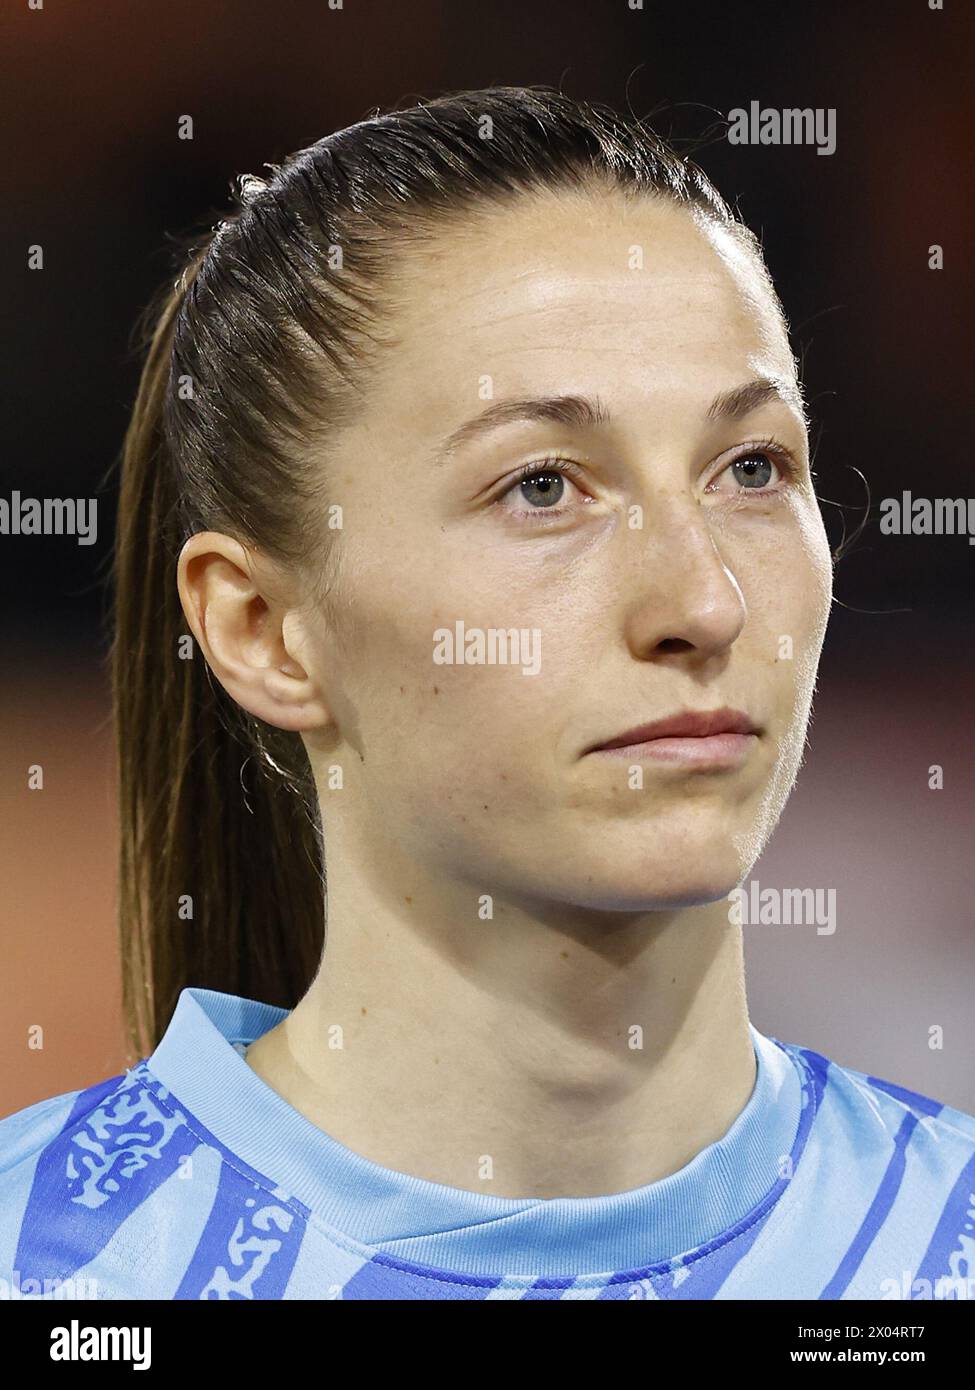 BREDA - Norway women goalkeeper Cecilie Fiskerstrand during the European Championship qualifying match for women in group A1 between the Netherlands and Norway at the Rat Verlegh stadium on April 9, 2024 in Breda, the Netherlands. ANP | Hollandse Hoogte | MAURICE VAN STEEN Stock Photo